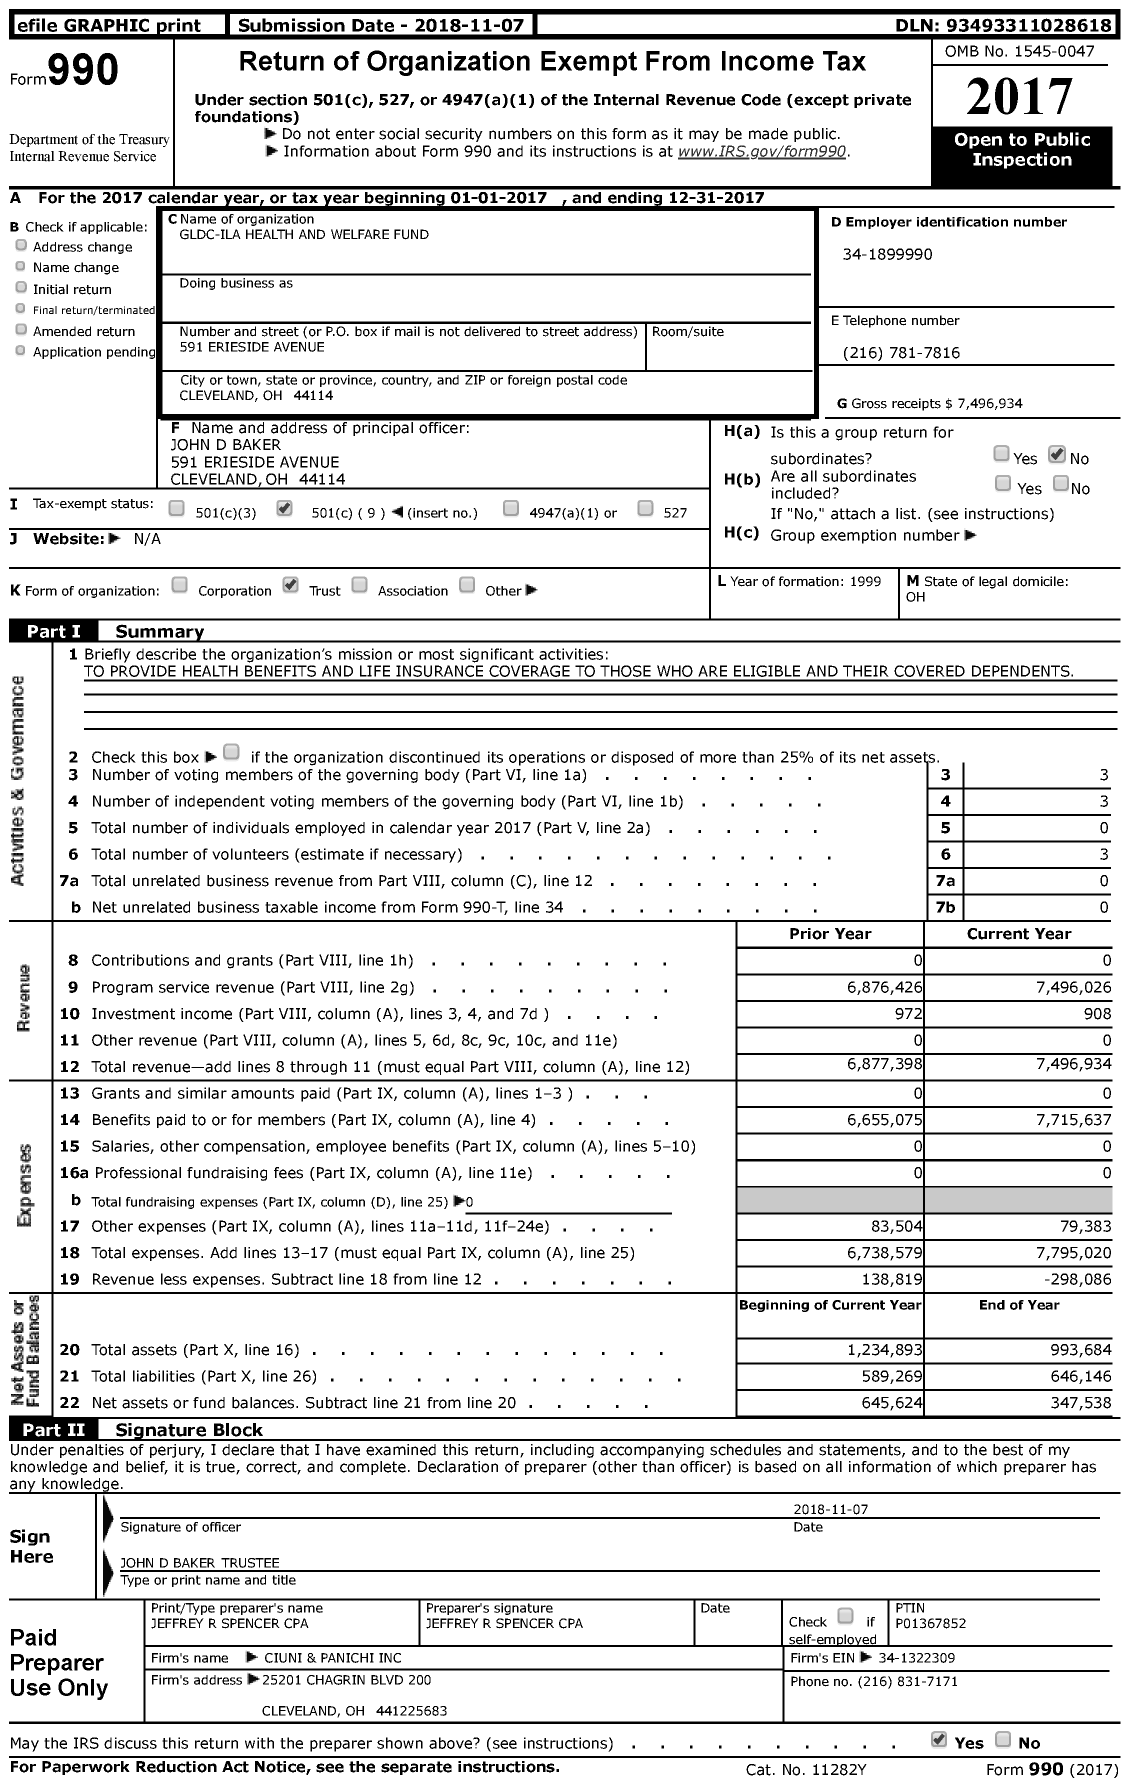 Image of first page of 2017 Form 990 for Gldc-Ila Health and Welfare Fund